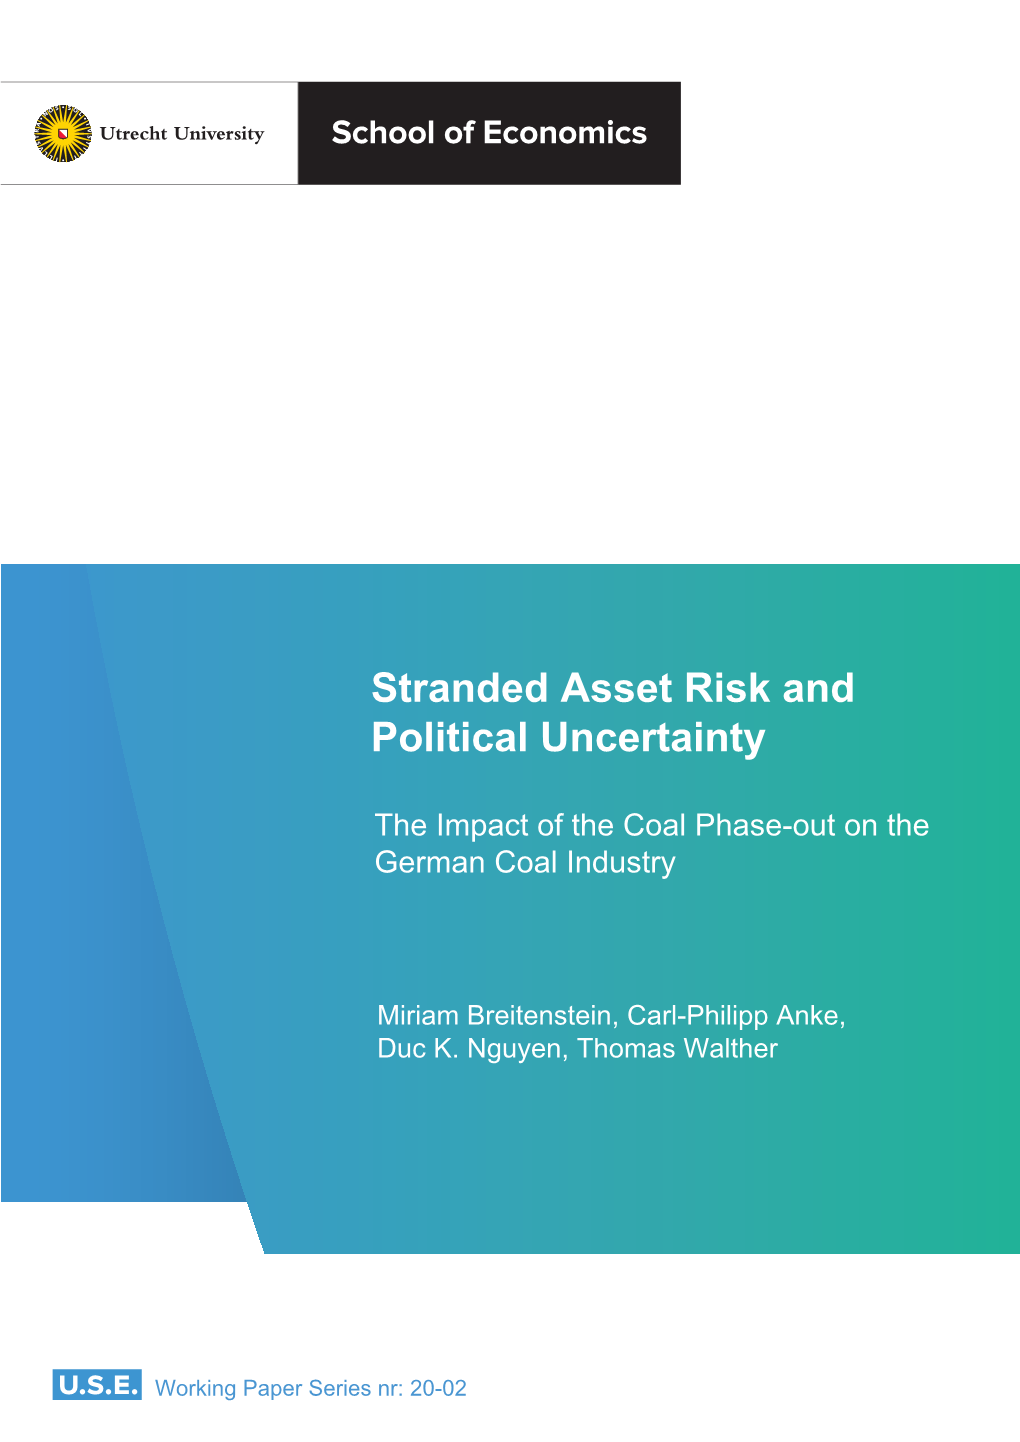 Stranded Asset Risk and Political Uncertainty